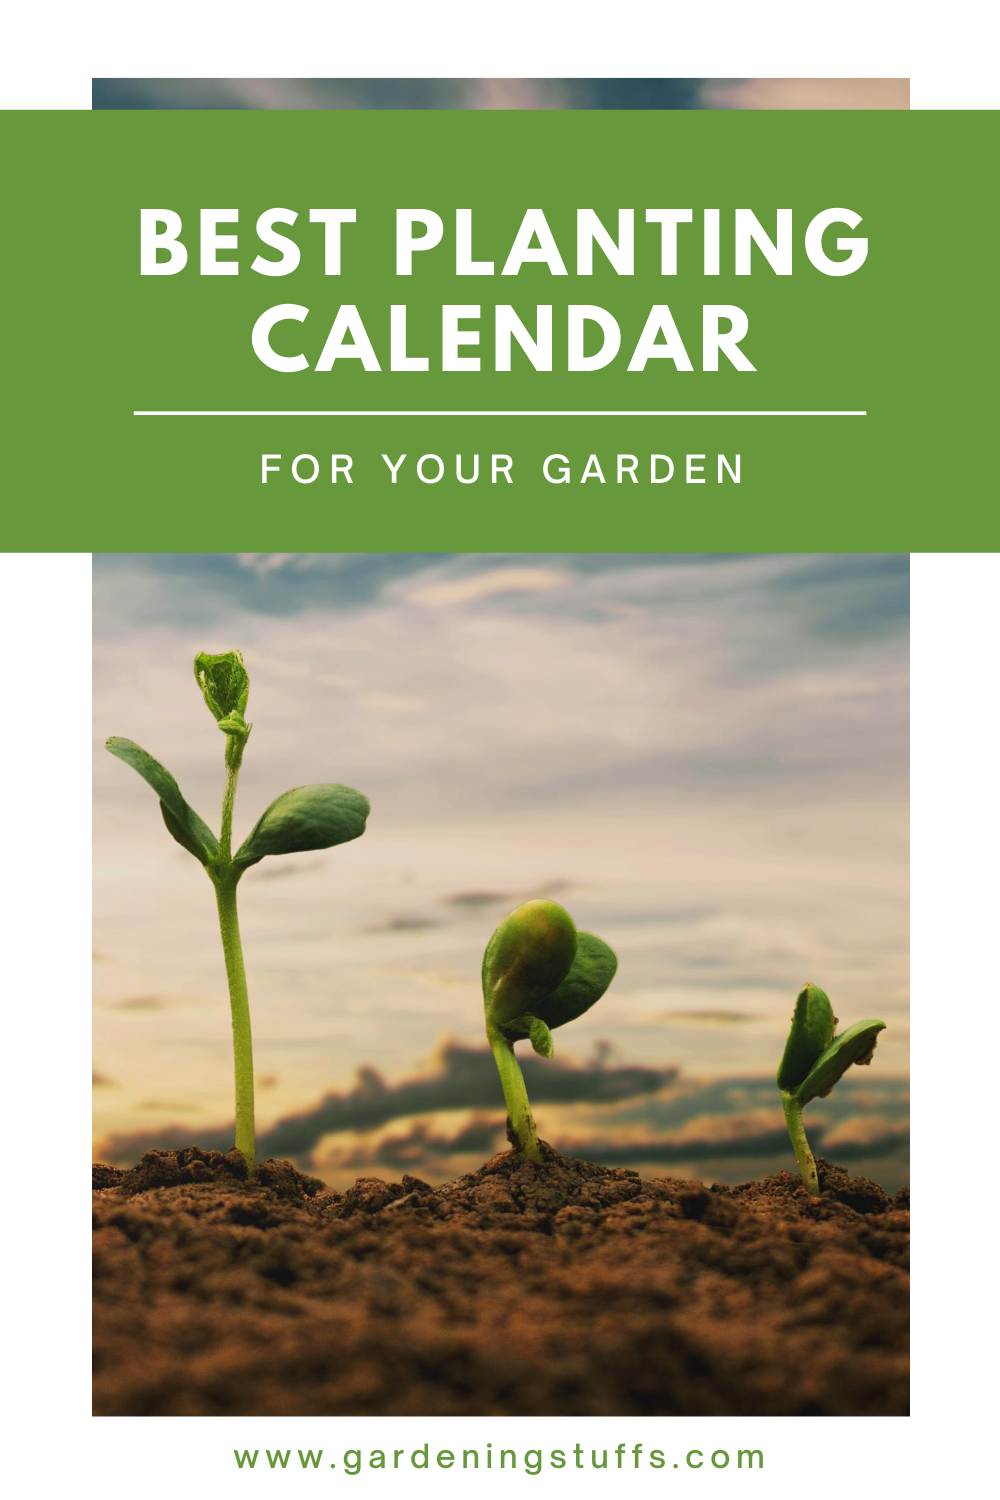 If you’re quite unsure about the kinds of plants you want to thrive in your garden this year. Check out our guide so you can start outlining your planting calendar!